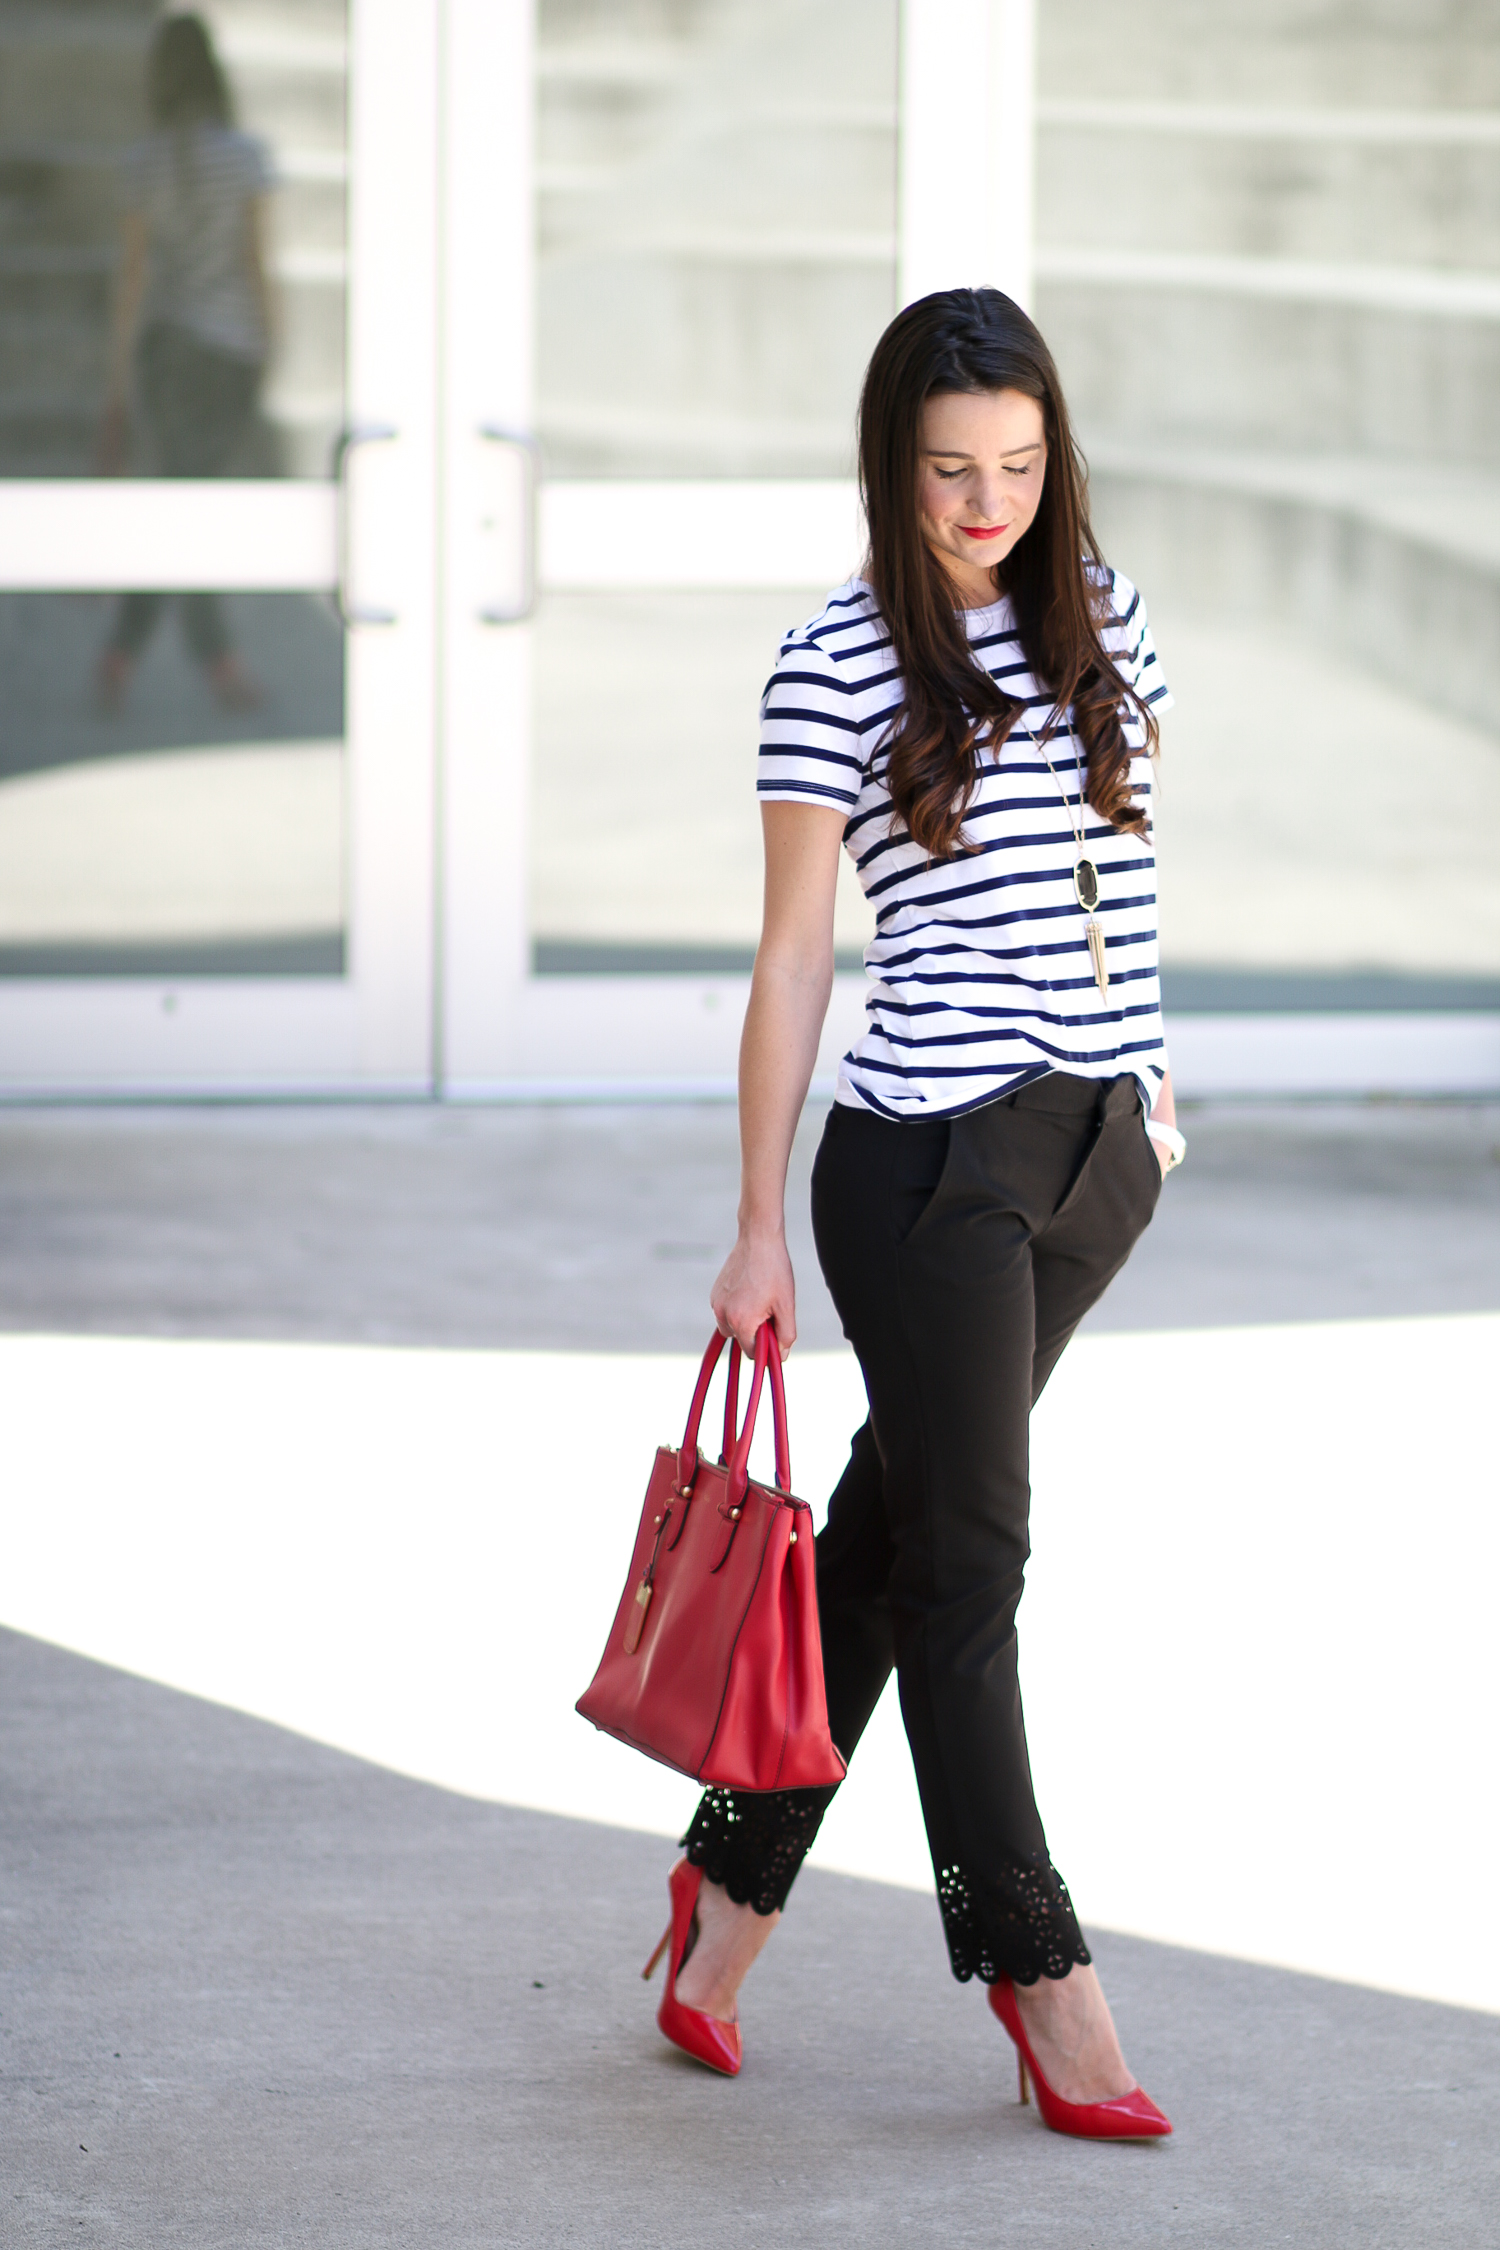 Stylish Business Casual Outfit Ideas from Banana Republic